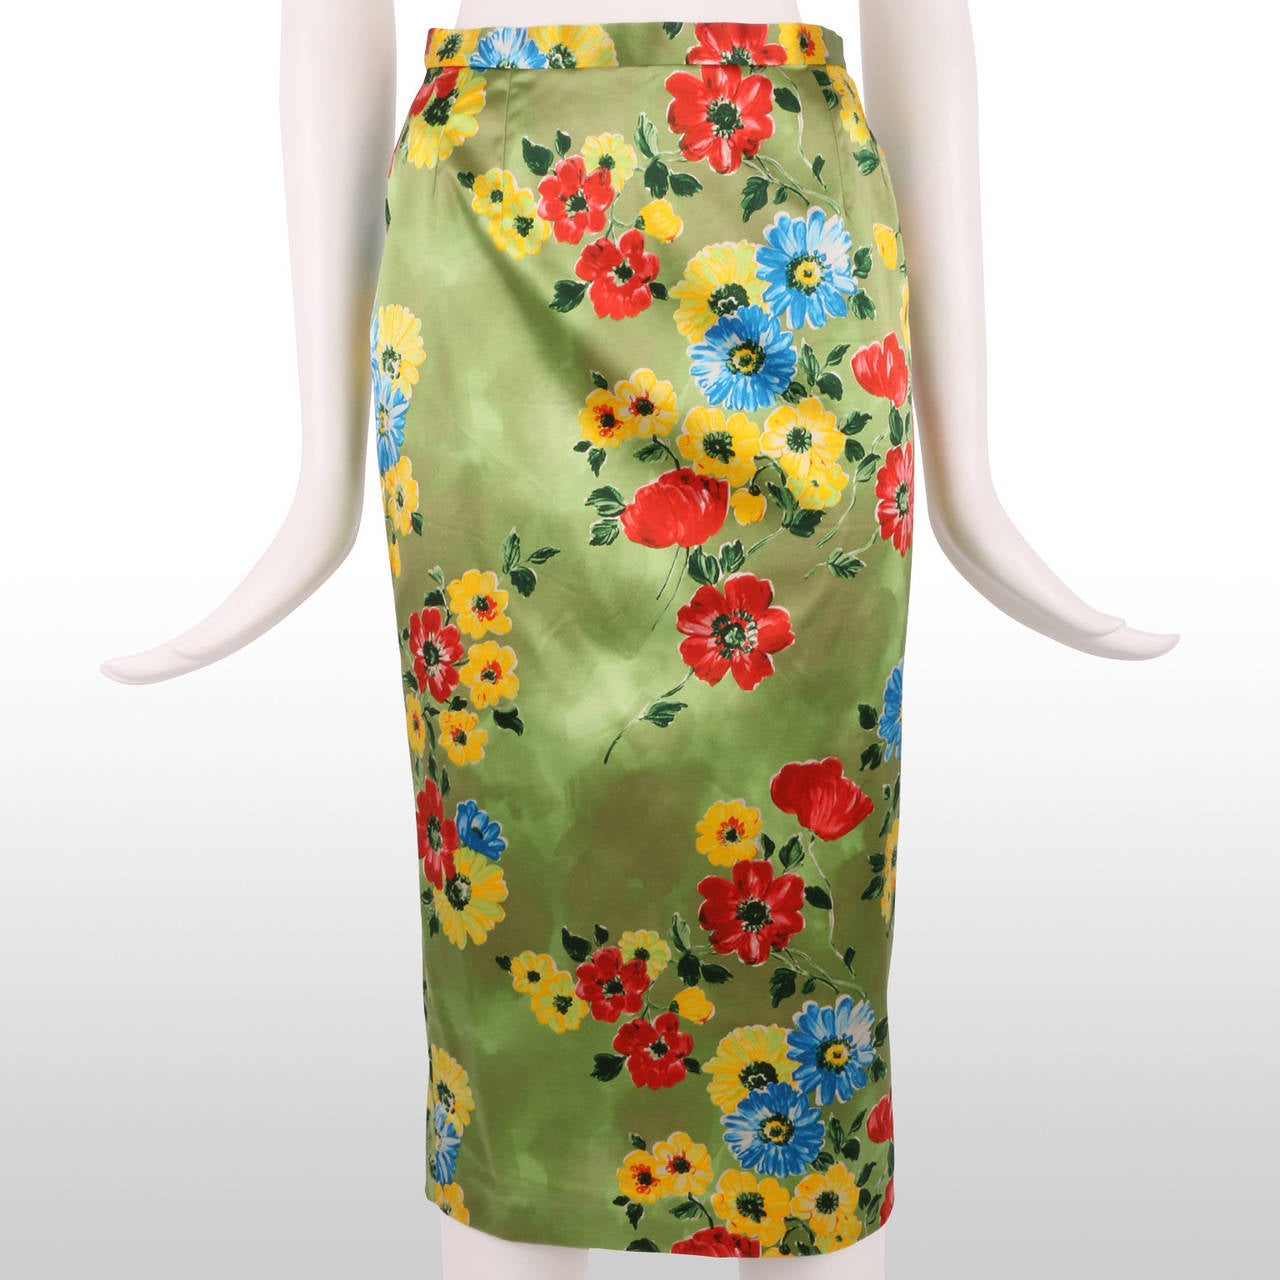 This bright and beautiful pencil skirt from Dolce and Gabbana is a great way to inject some colour into your summer wardrobe. The fun and bright floral print in tones of cornflower blue, strawberry red and sunshine yellow compliments the simplistic